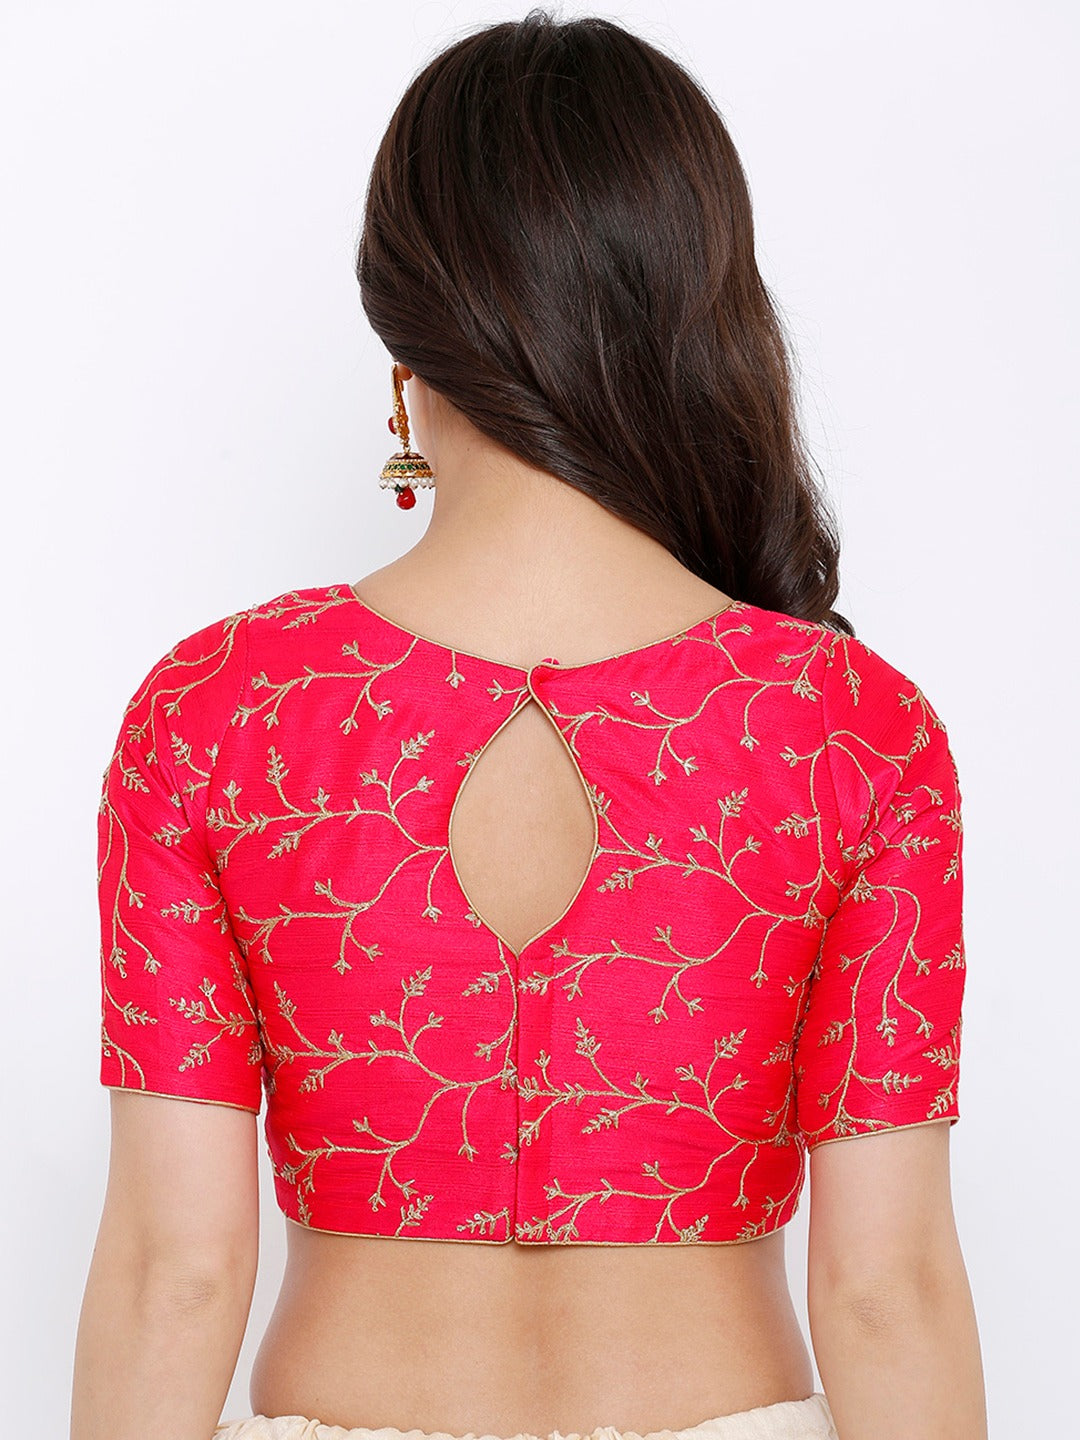 Pink Embroidered Saree Blouse Indian Clothing in Denver, CO, Aurora, CO, Boulder, CO, Fort Collins, CO, Colorado Springs, CO, Parker, CO, Highlands Ranch, CO, Cherry Creek, CO, Centennial, CO, and Longmont, CO. NATIONWIDE SHIPPING USA- India Fashion X